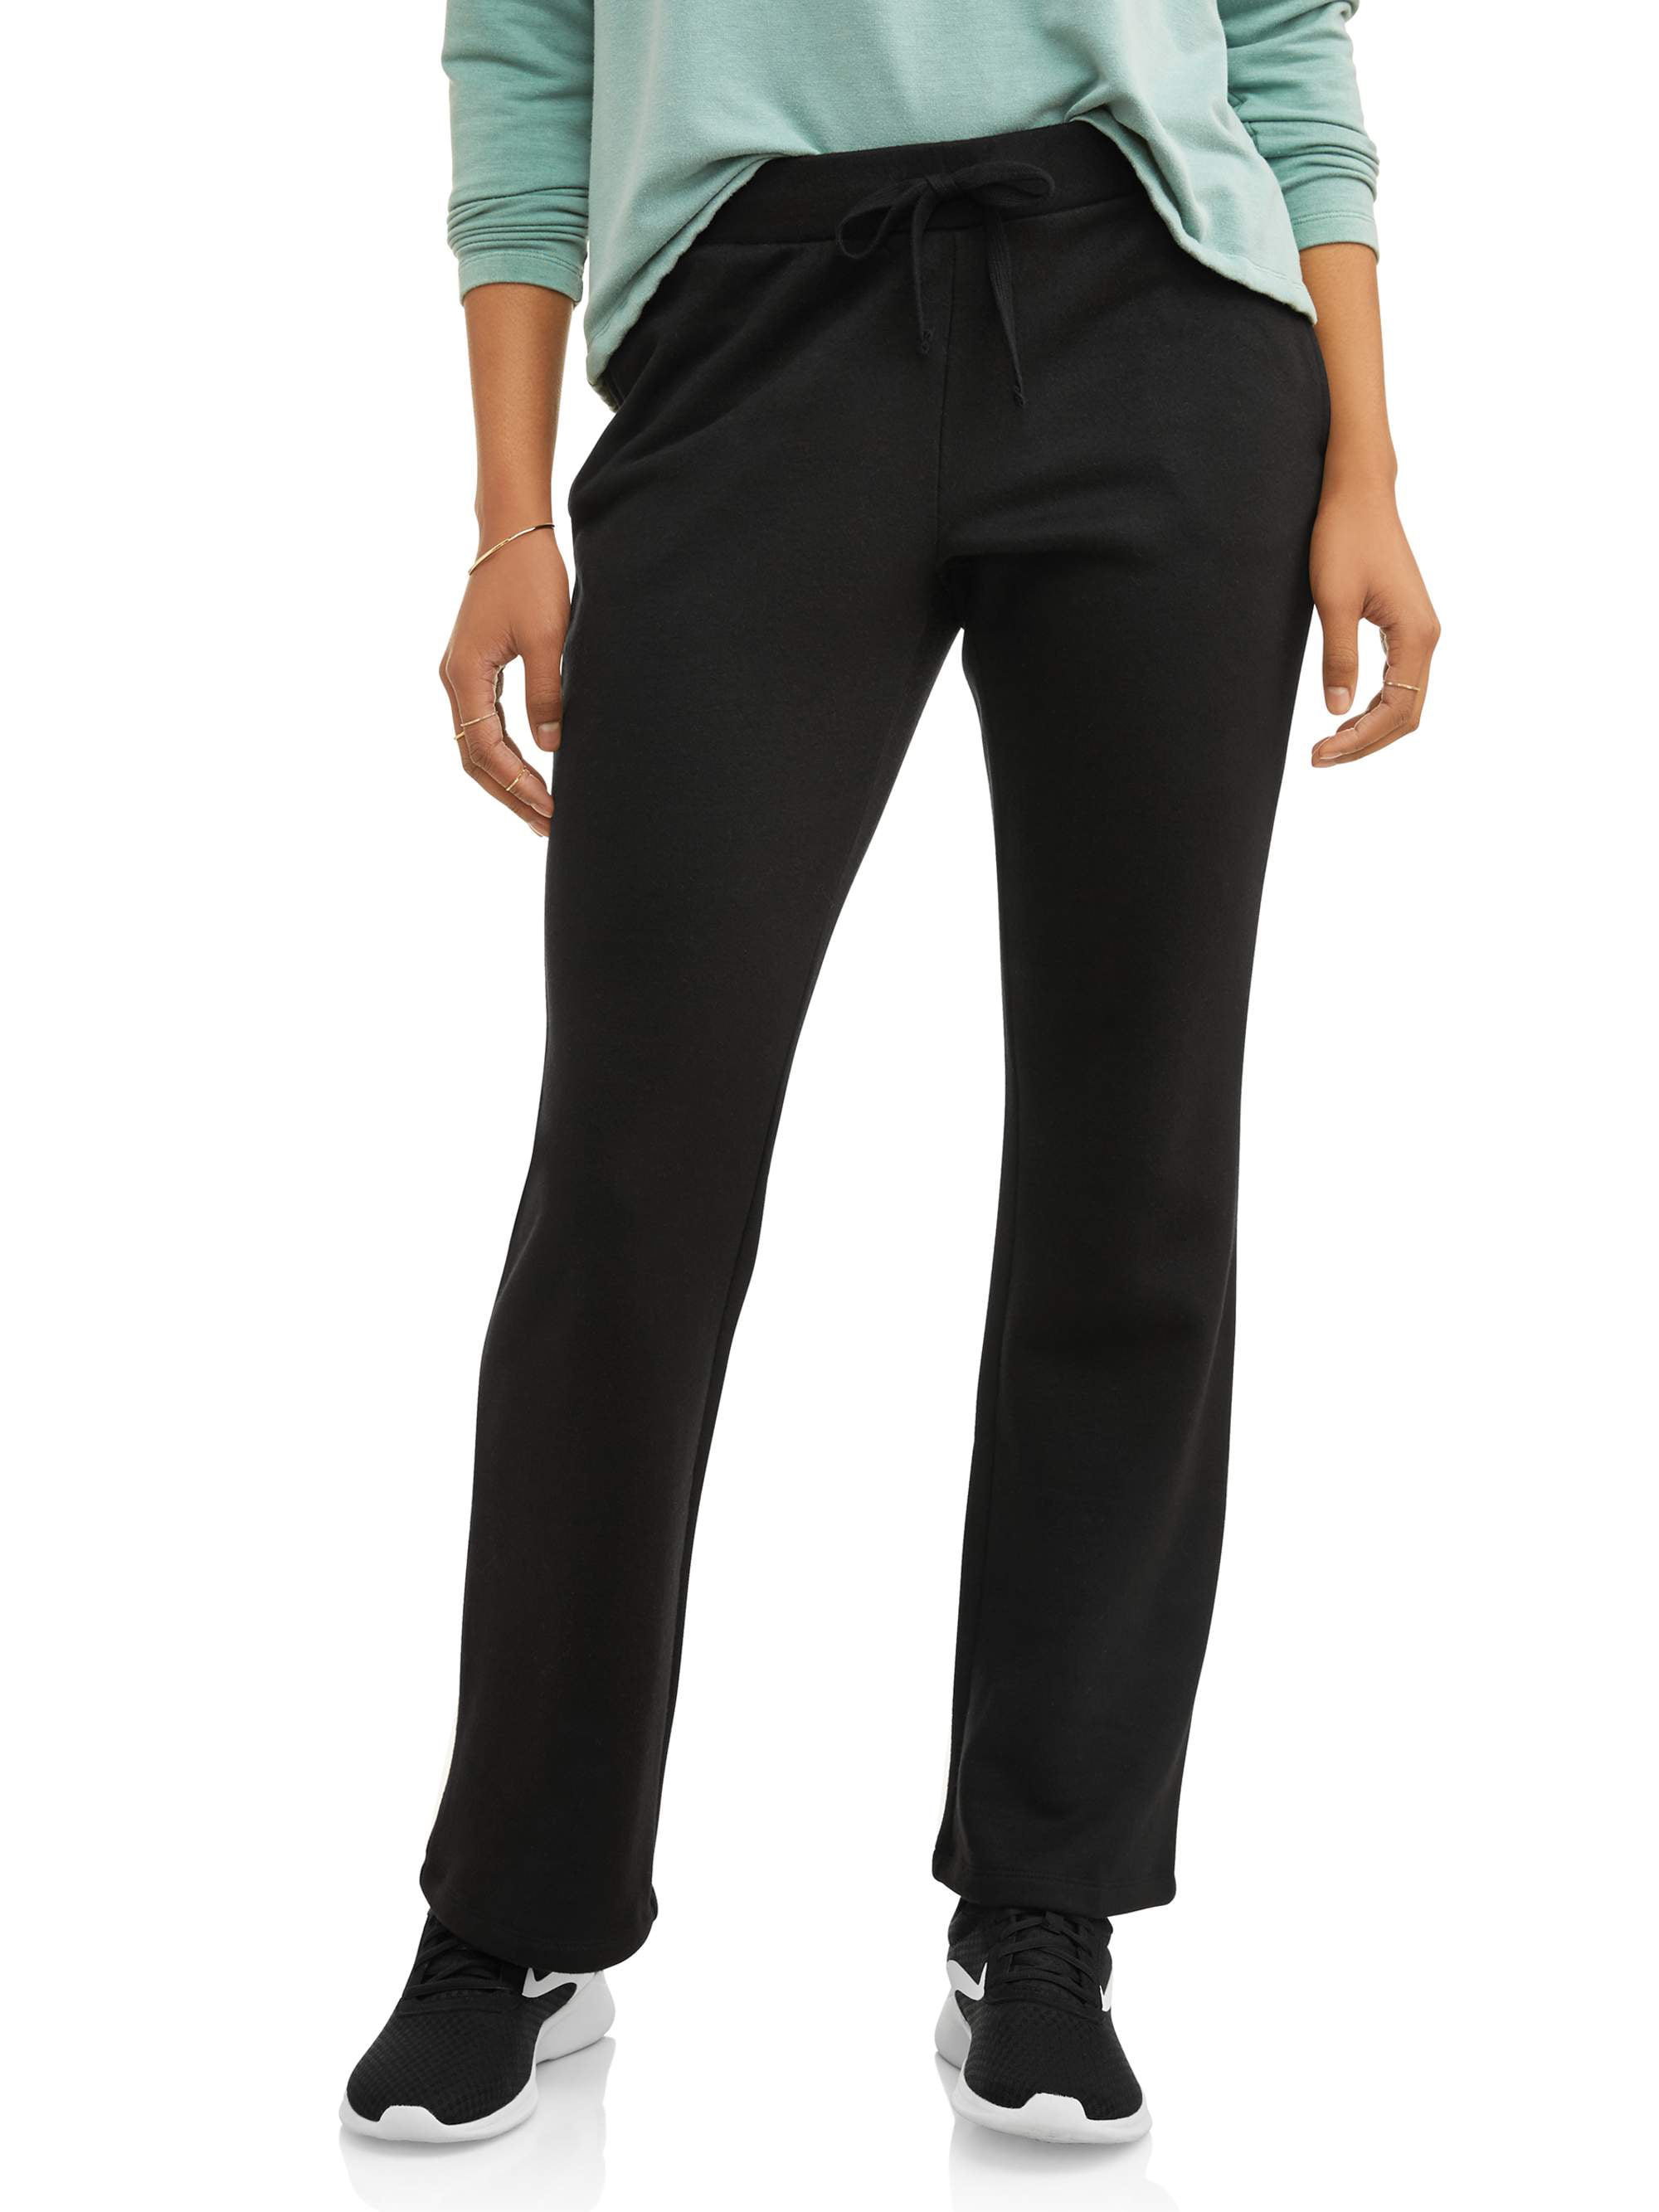 Athletic Works Women's Athleisure Fleece Pants with Front Pockets ...